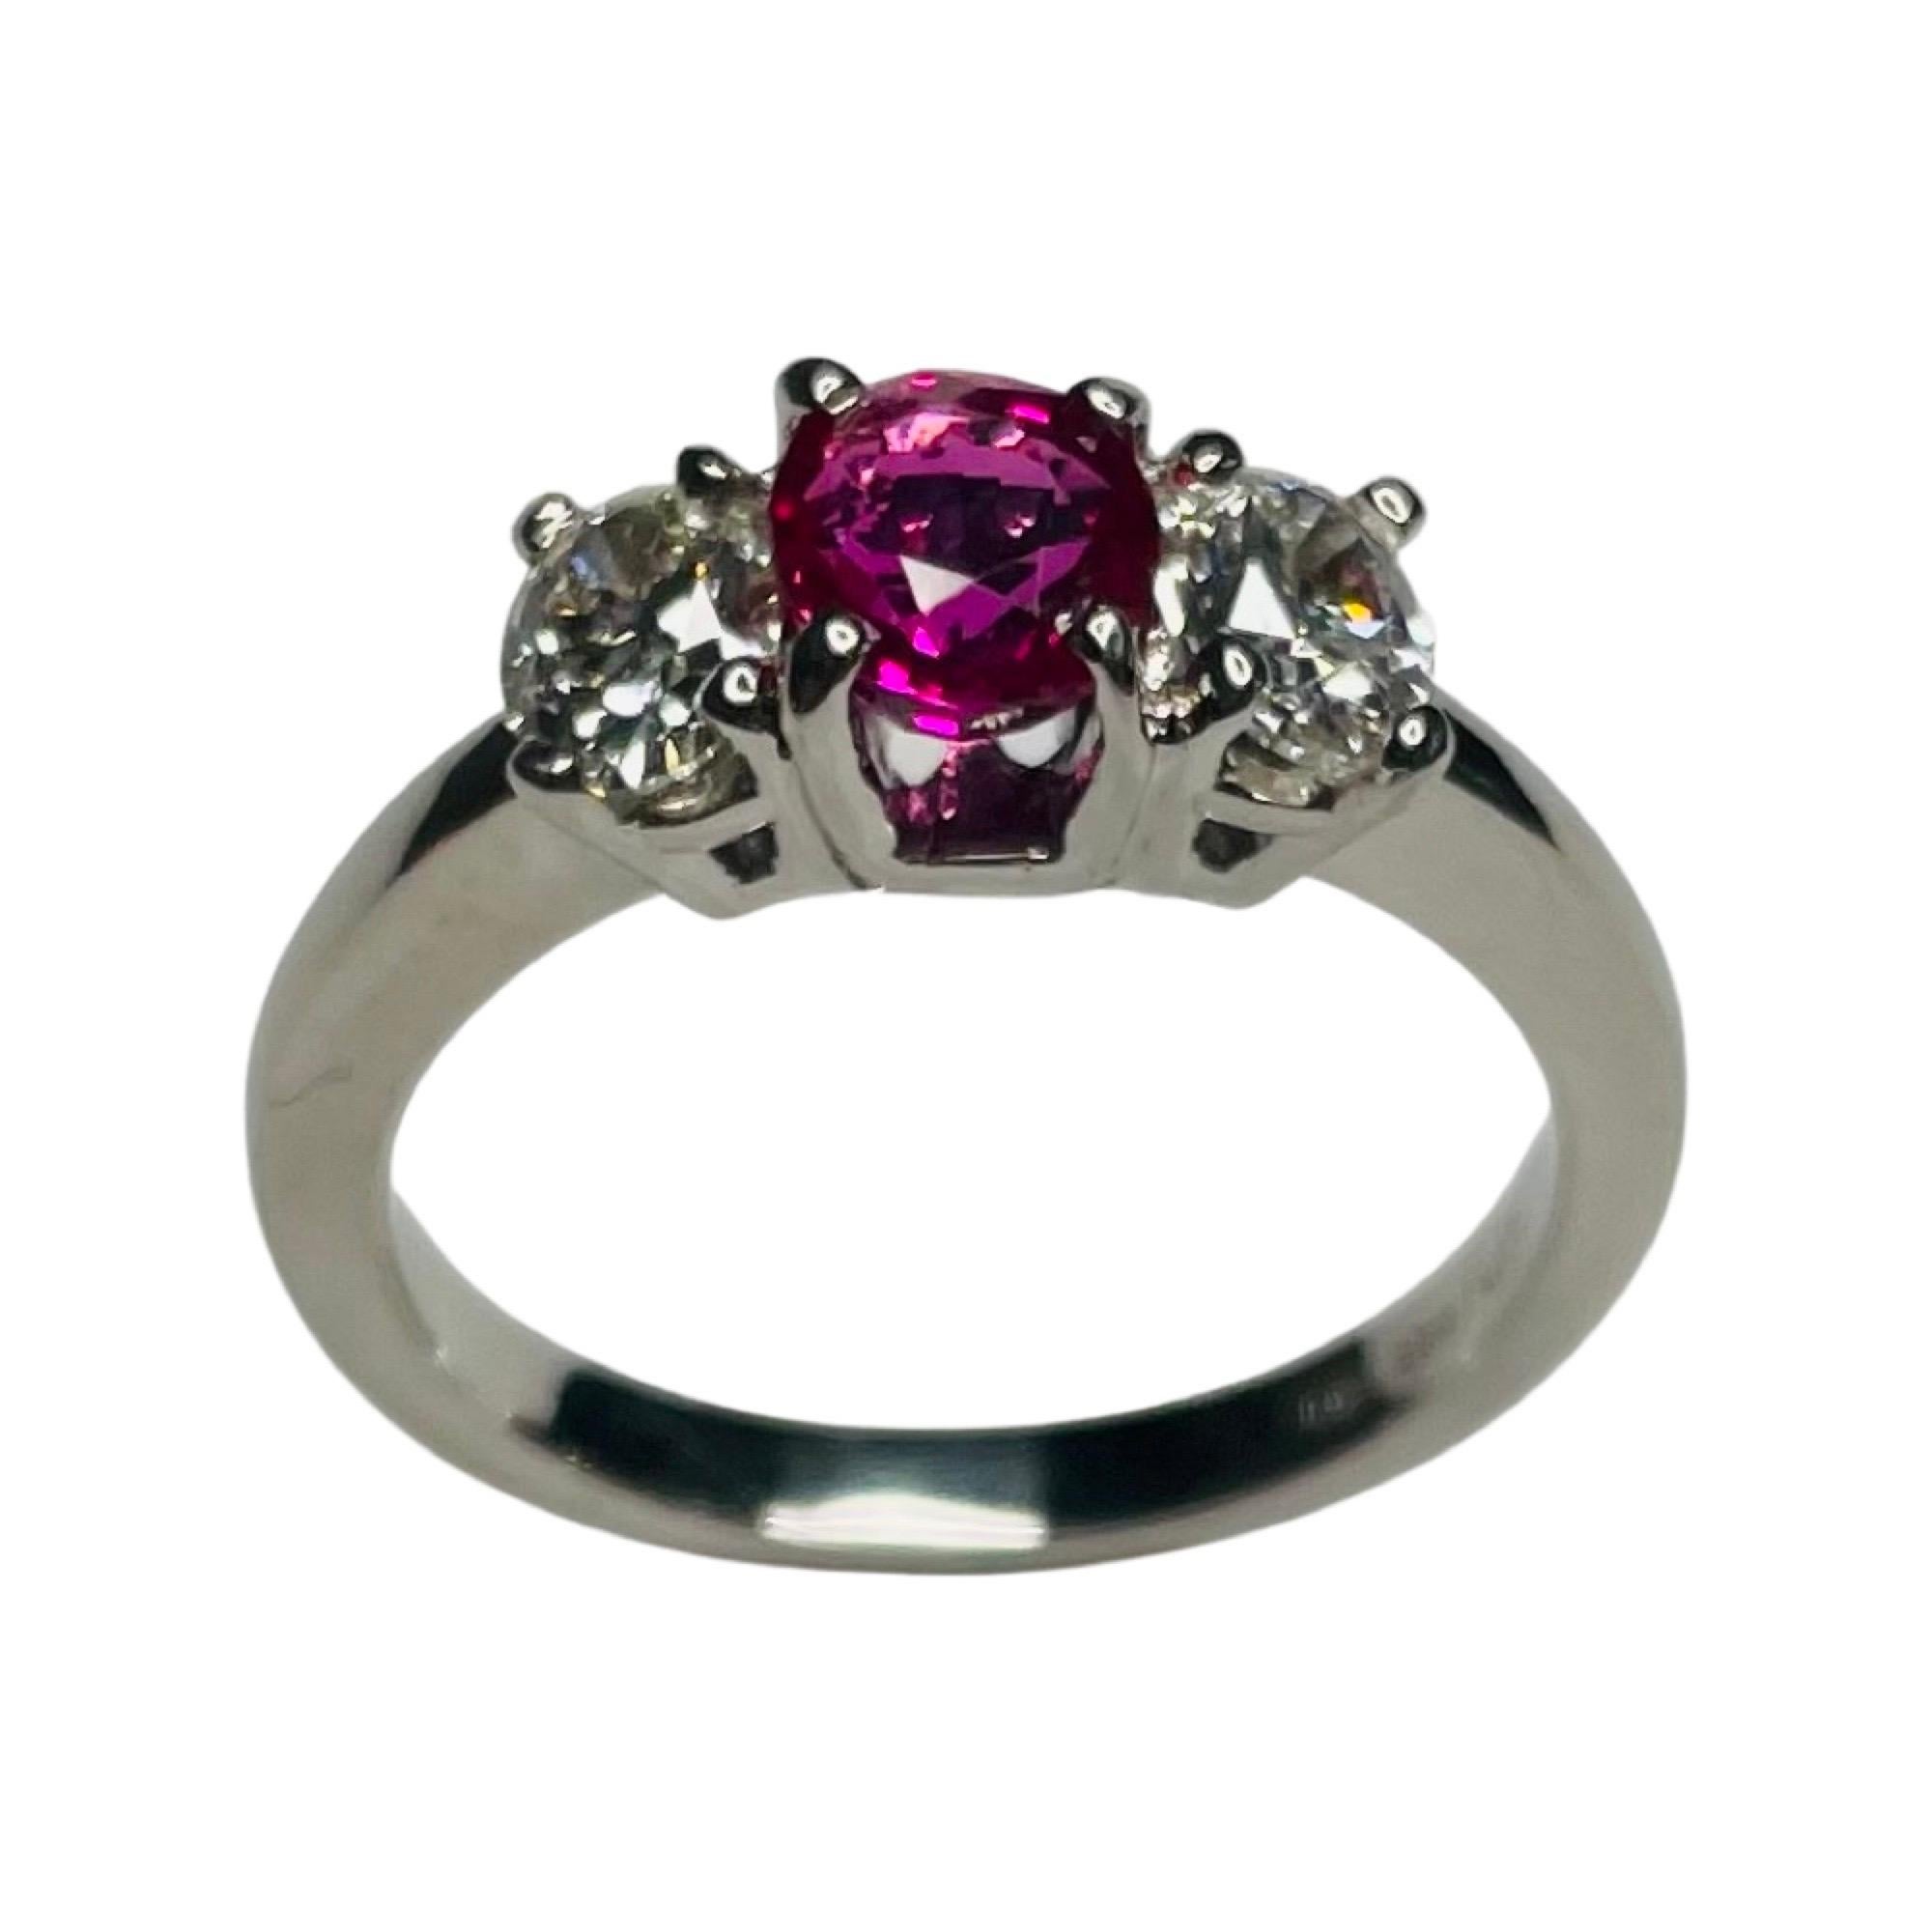 Lithos Platinum, Diamond and Ruby 3 Stone Ring. The Ruby is 1.09 carats. It has an AGL certification # GB46053. It measures 6.09 mm X 5.04 mm X 3.38 mm. It is a medium, vivid, slightly purplish red in color. It has been heat treated. The two oval